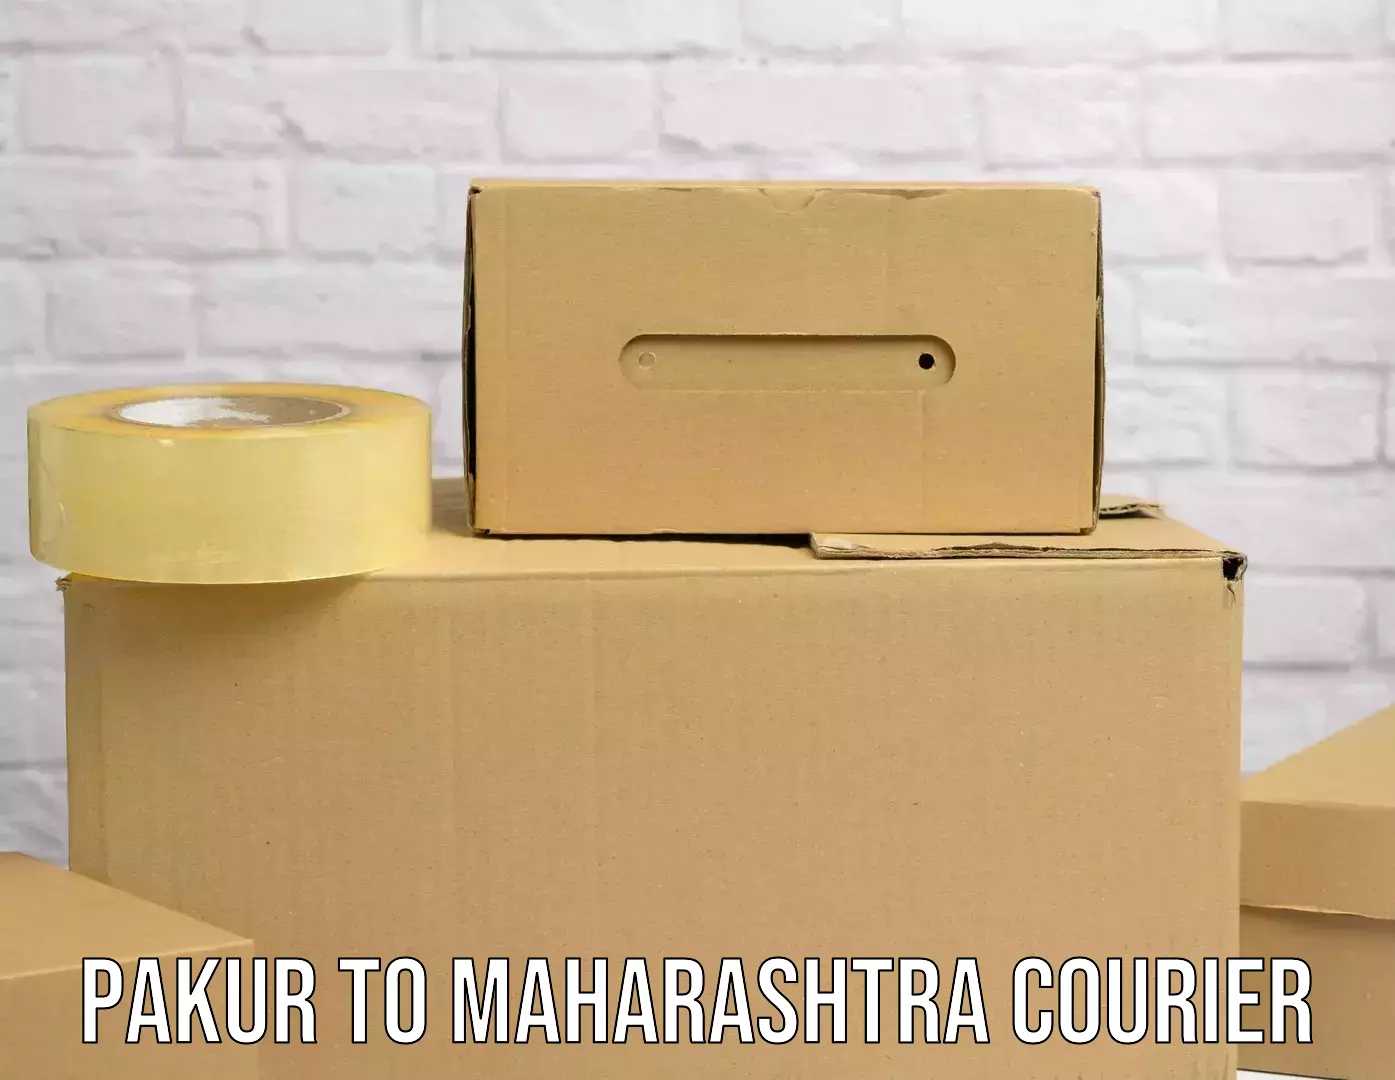 Small business couriers Pakur to Alephata